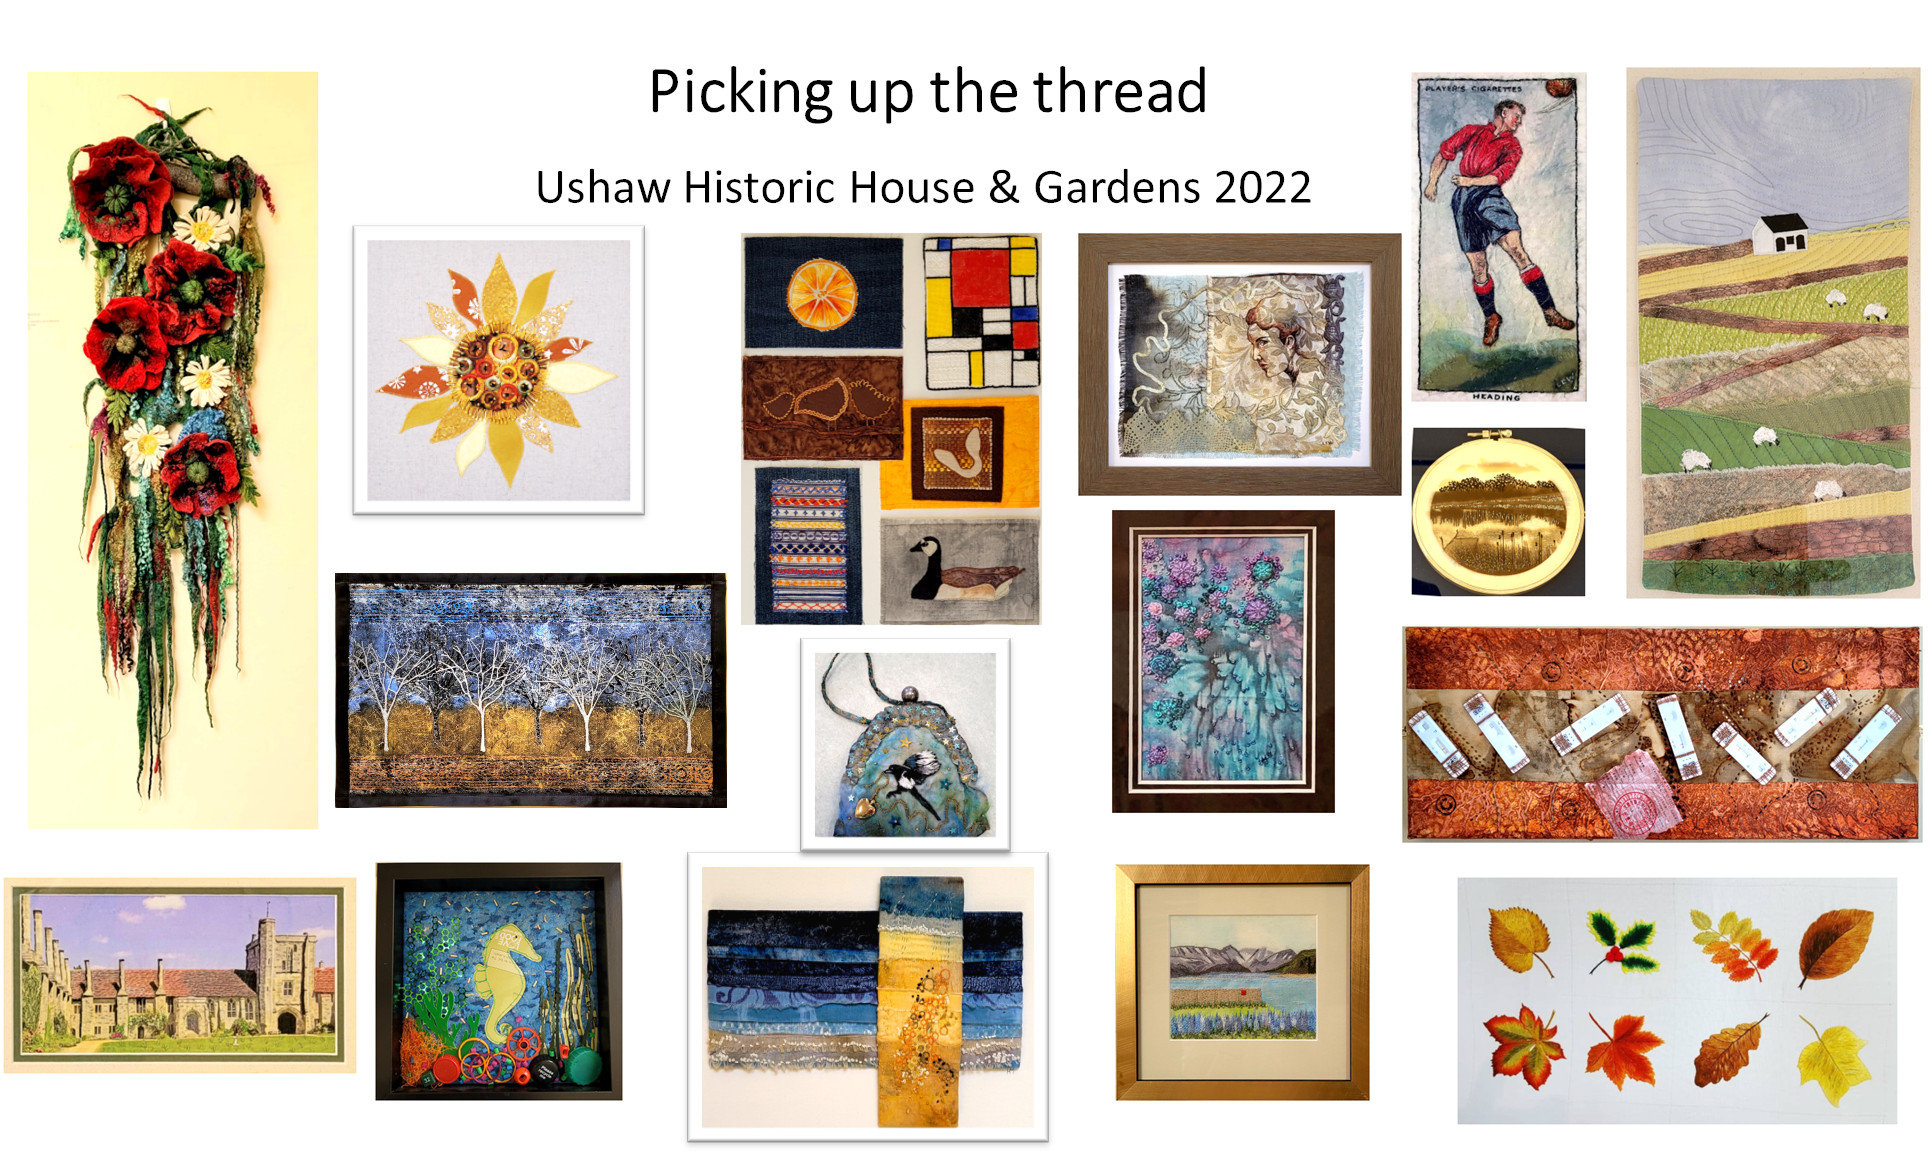 Selection of works from Ushaw Exhibition 2022